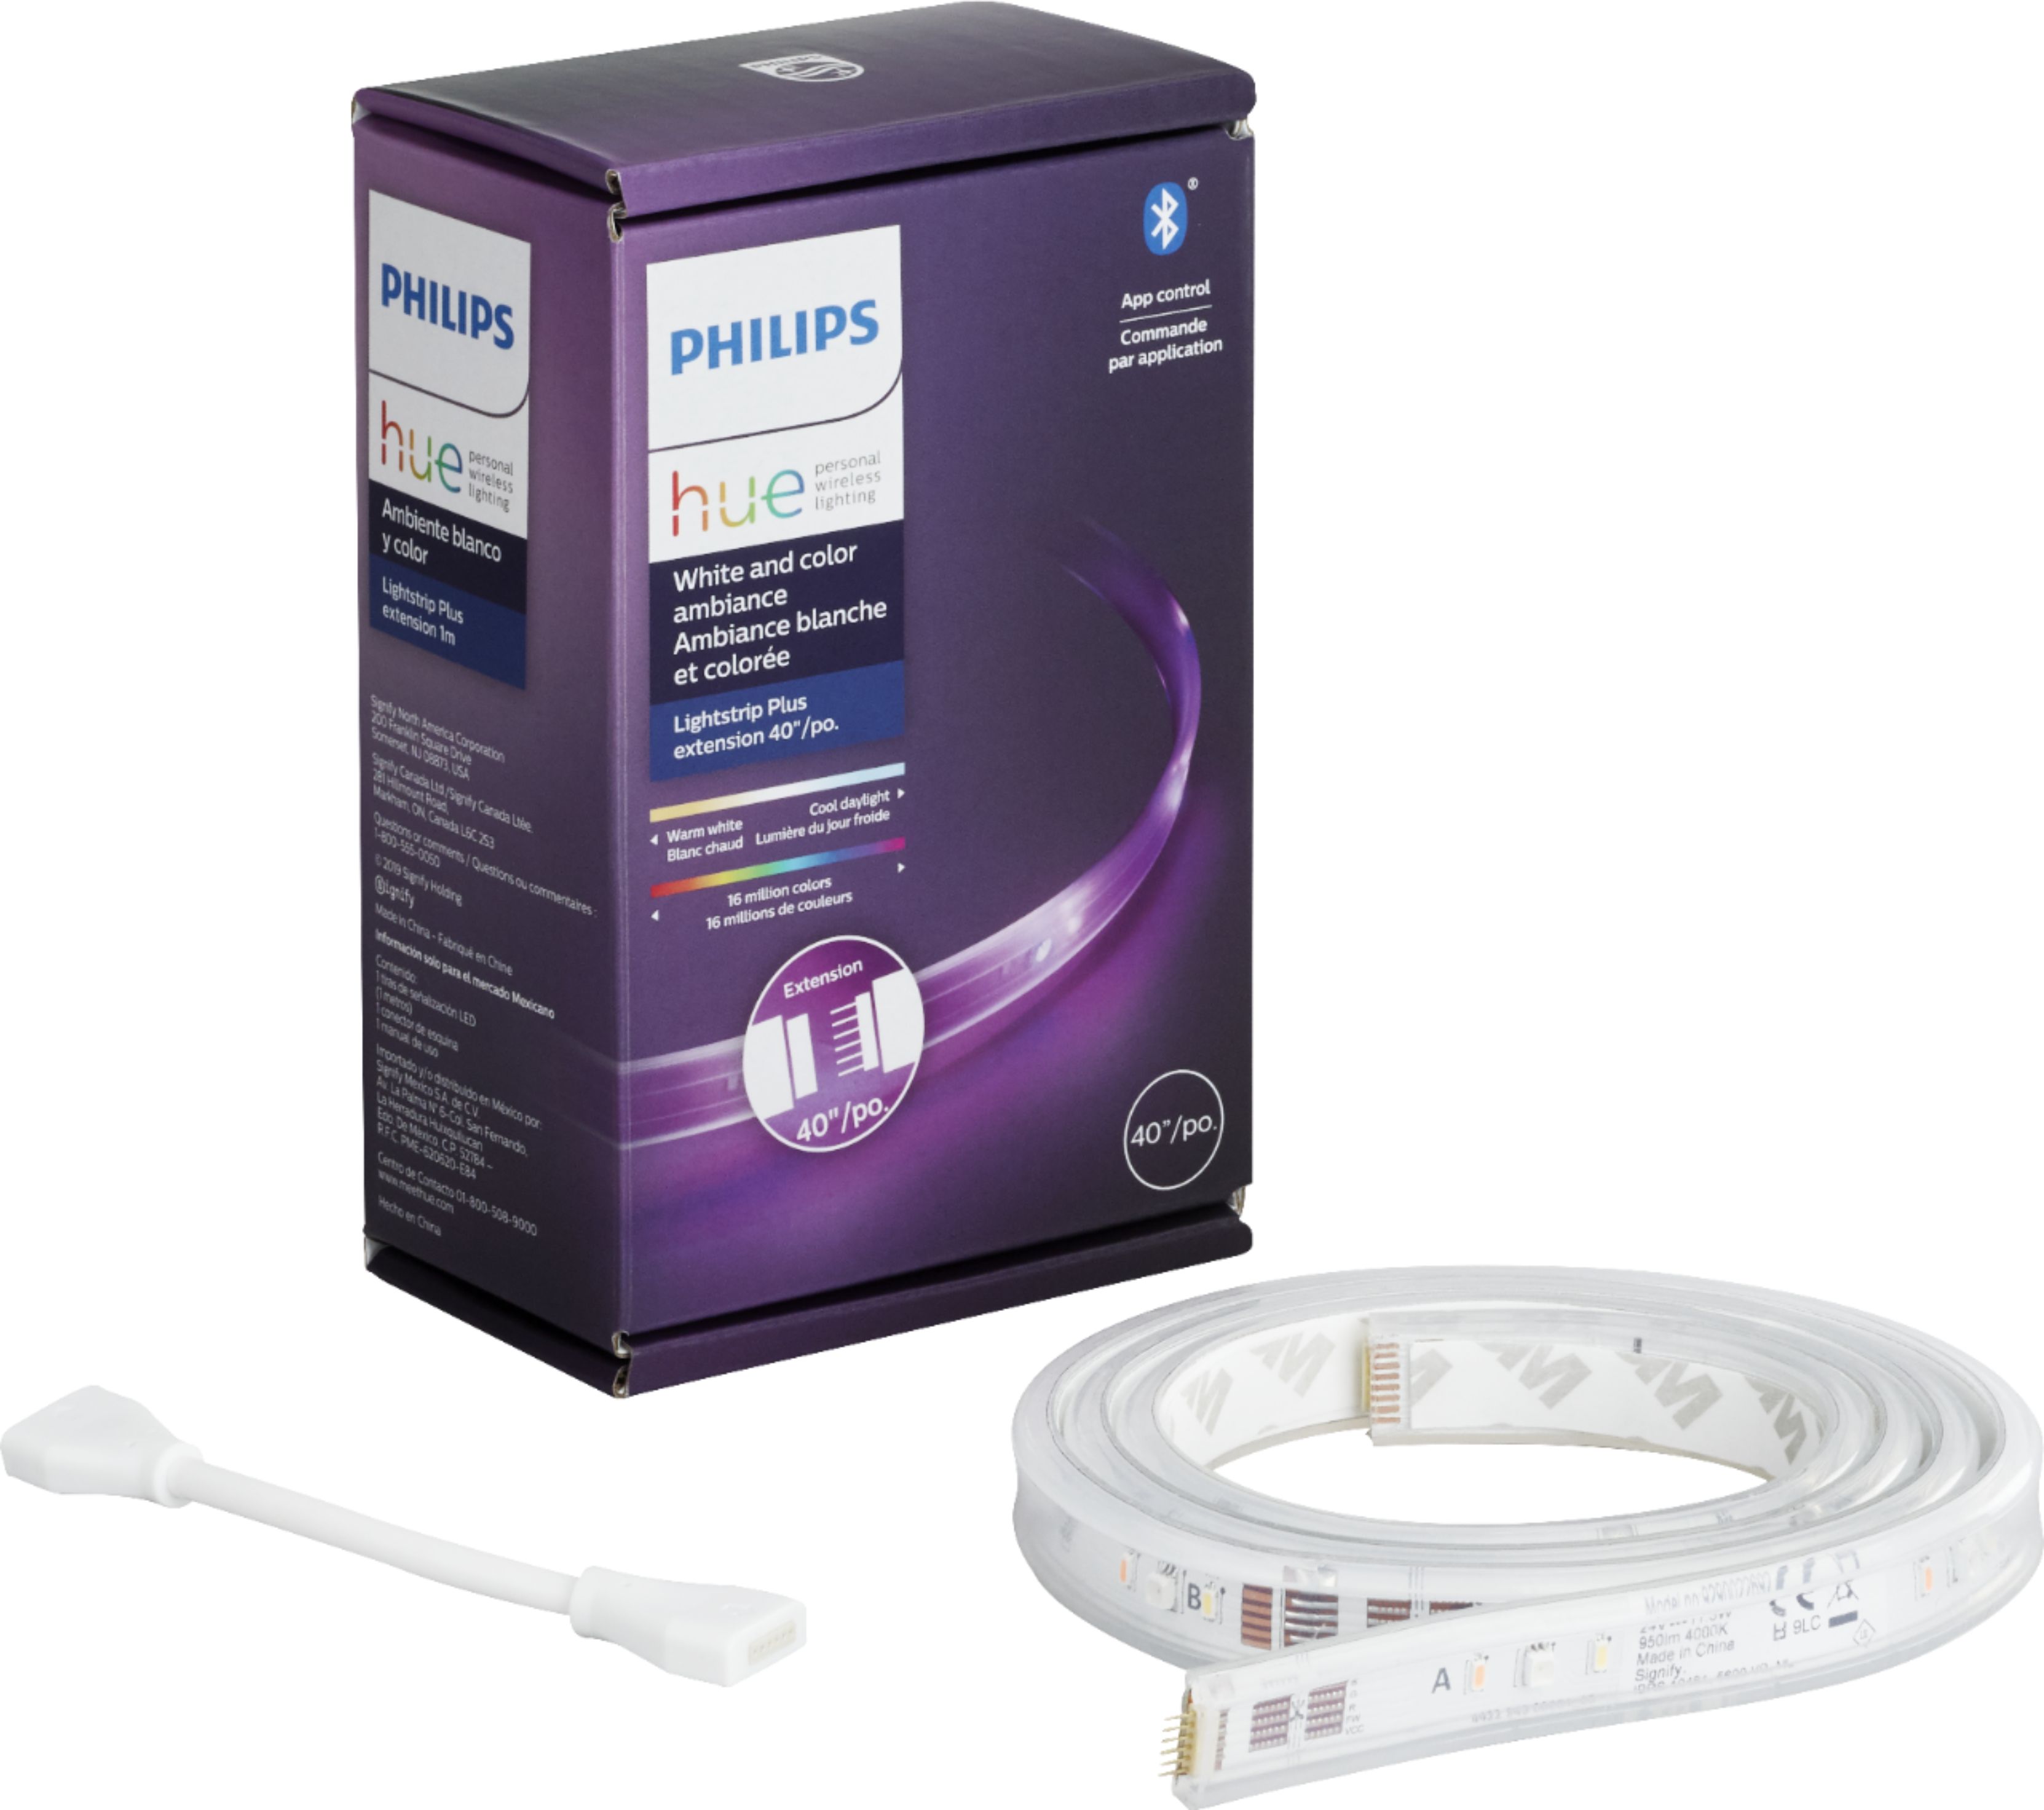 Philips Geek Squad Certified Refurbished Hue Lightstrip Plus 1m Extension  with Bluetooth White and Color Ambiance GSRF 555326 Best Buy